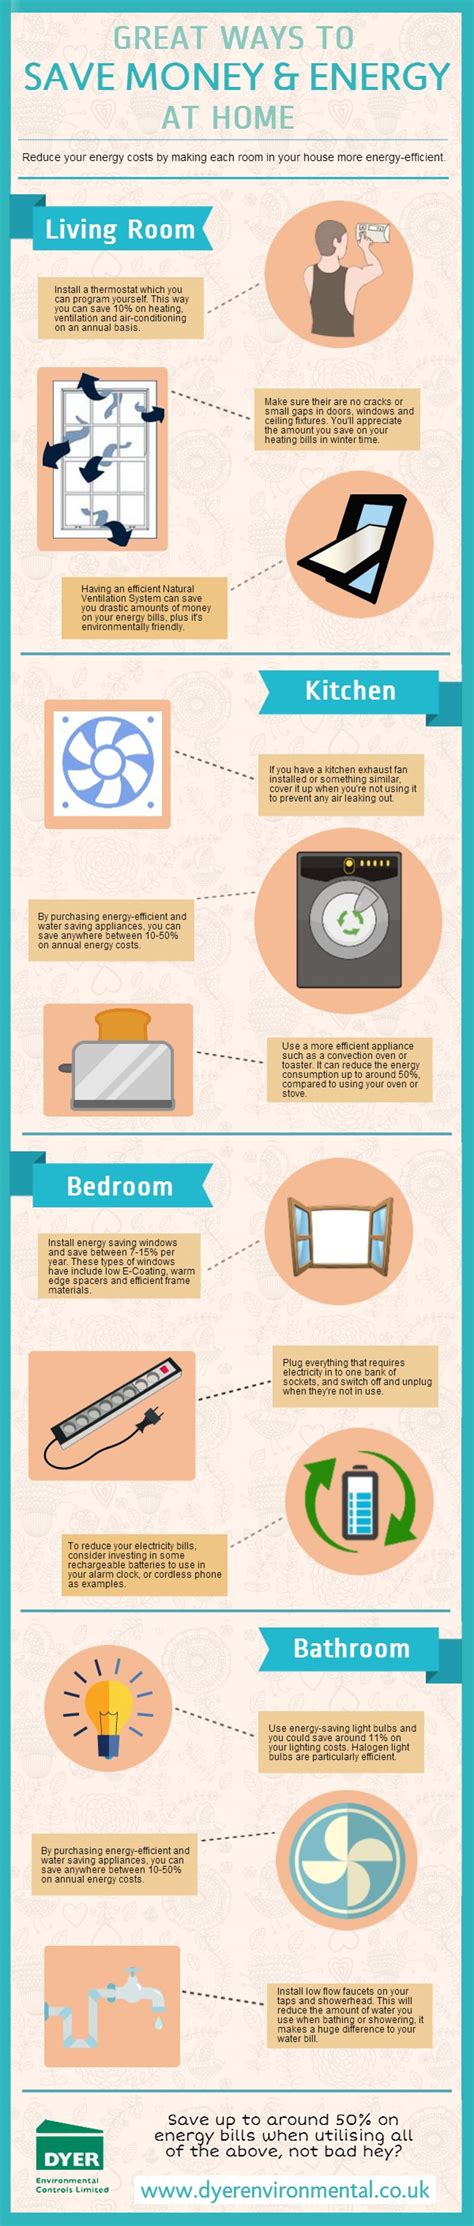 These are some quick tips to conserve energy and save money. Simple Ways to Save Energy & Reduce Bills at Home | Visual.ly